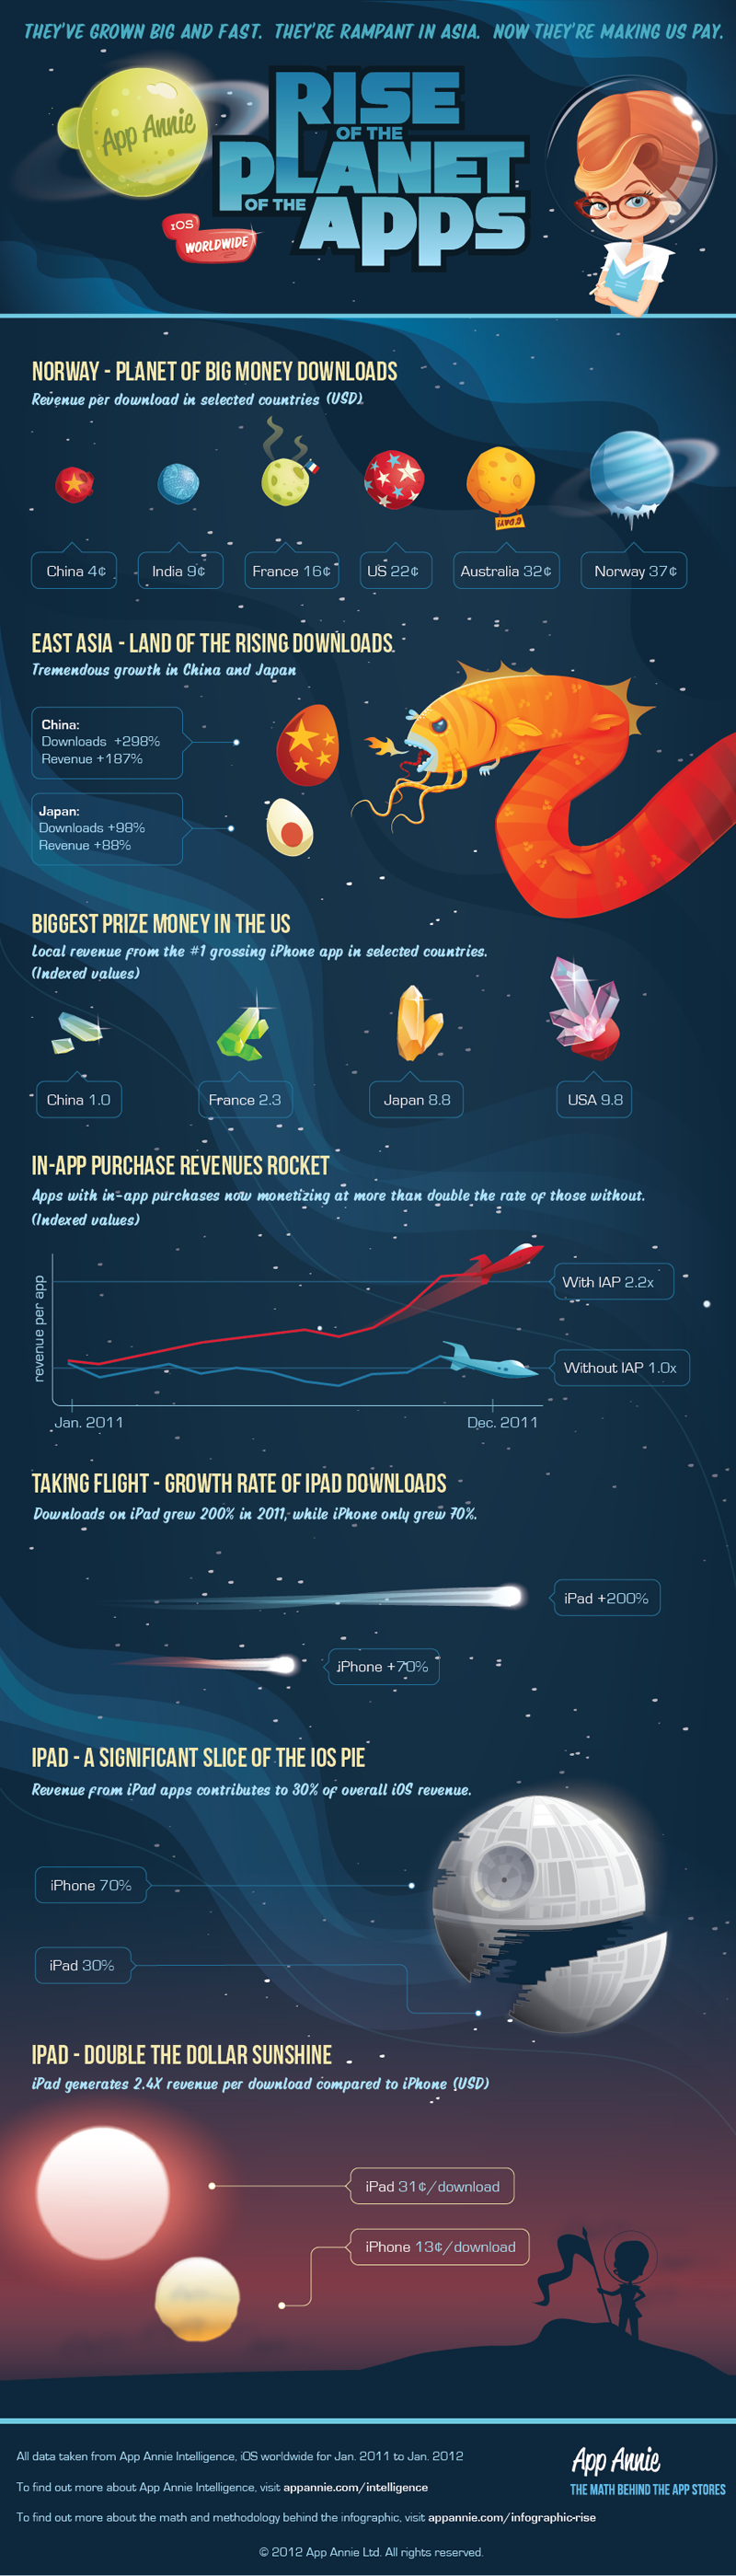 ios  apple  android  iphone  ipad  space  jetsons  app annie  scifi apple android iphone iPad infographic